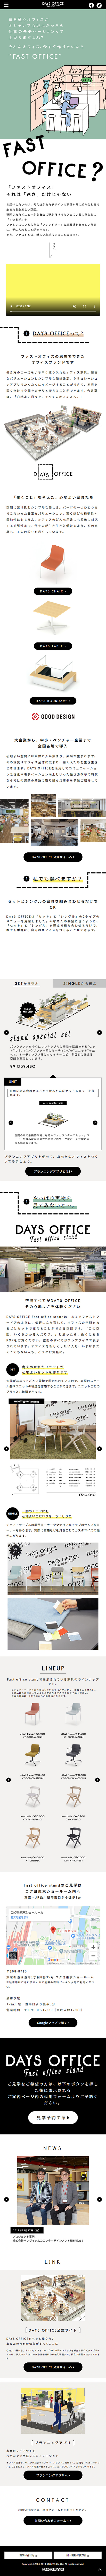 Fast office stand by DAYS OFFICE_sp_1